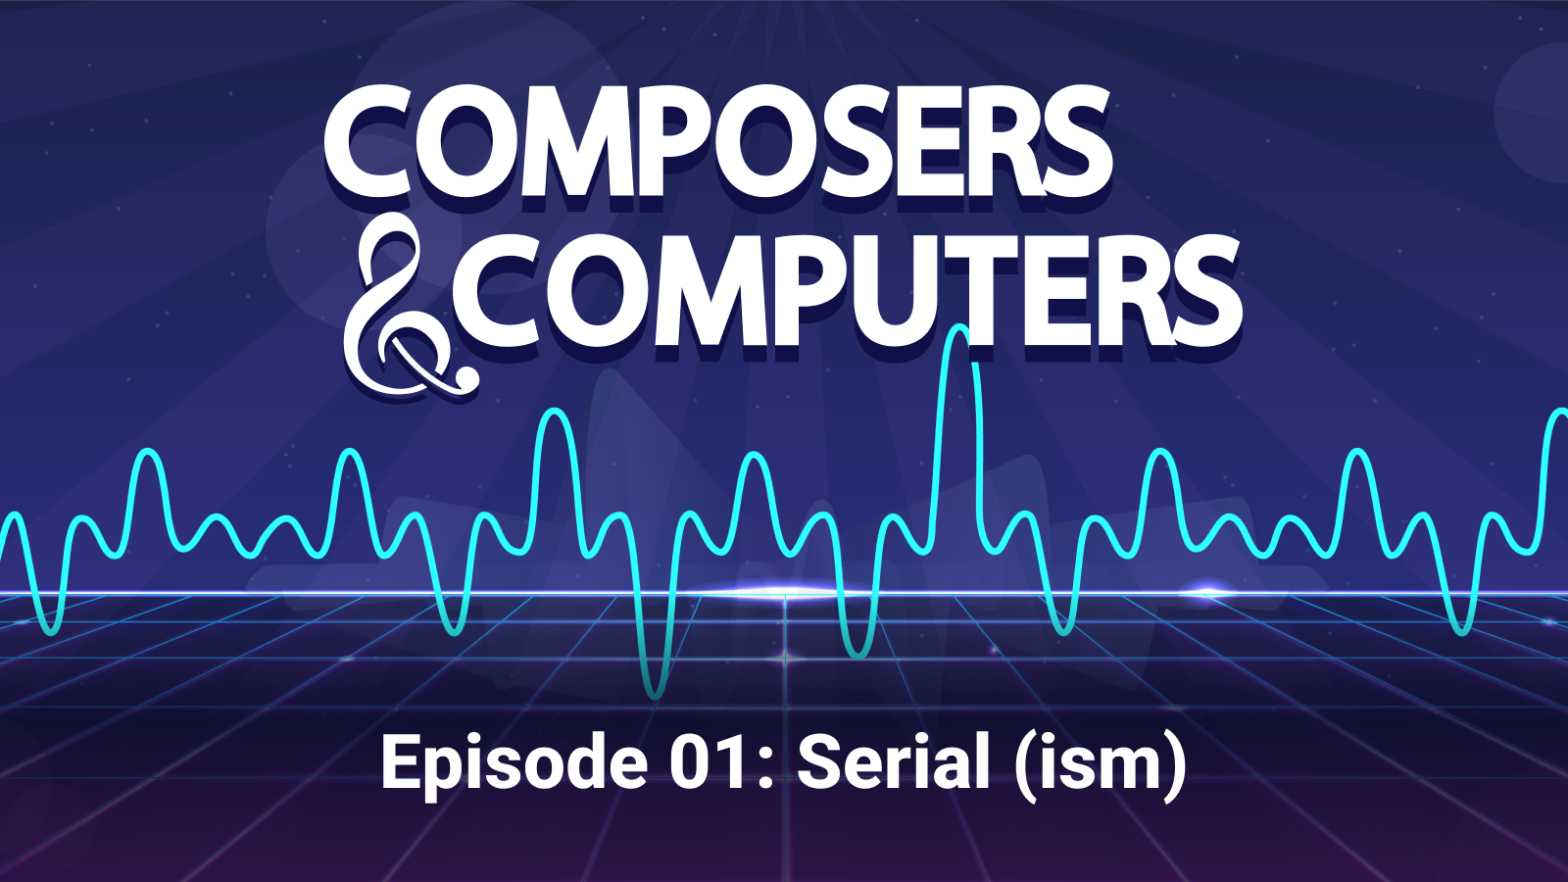 Composers & Computers, Episode 01: Serial(ism). the ampersand is a treble clef. There is a sound wave image below the title.